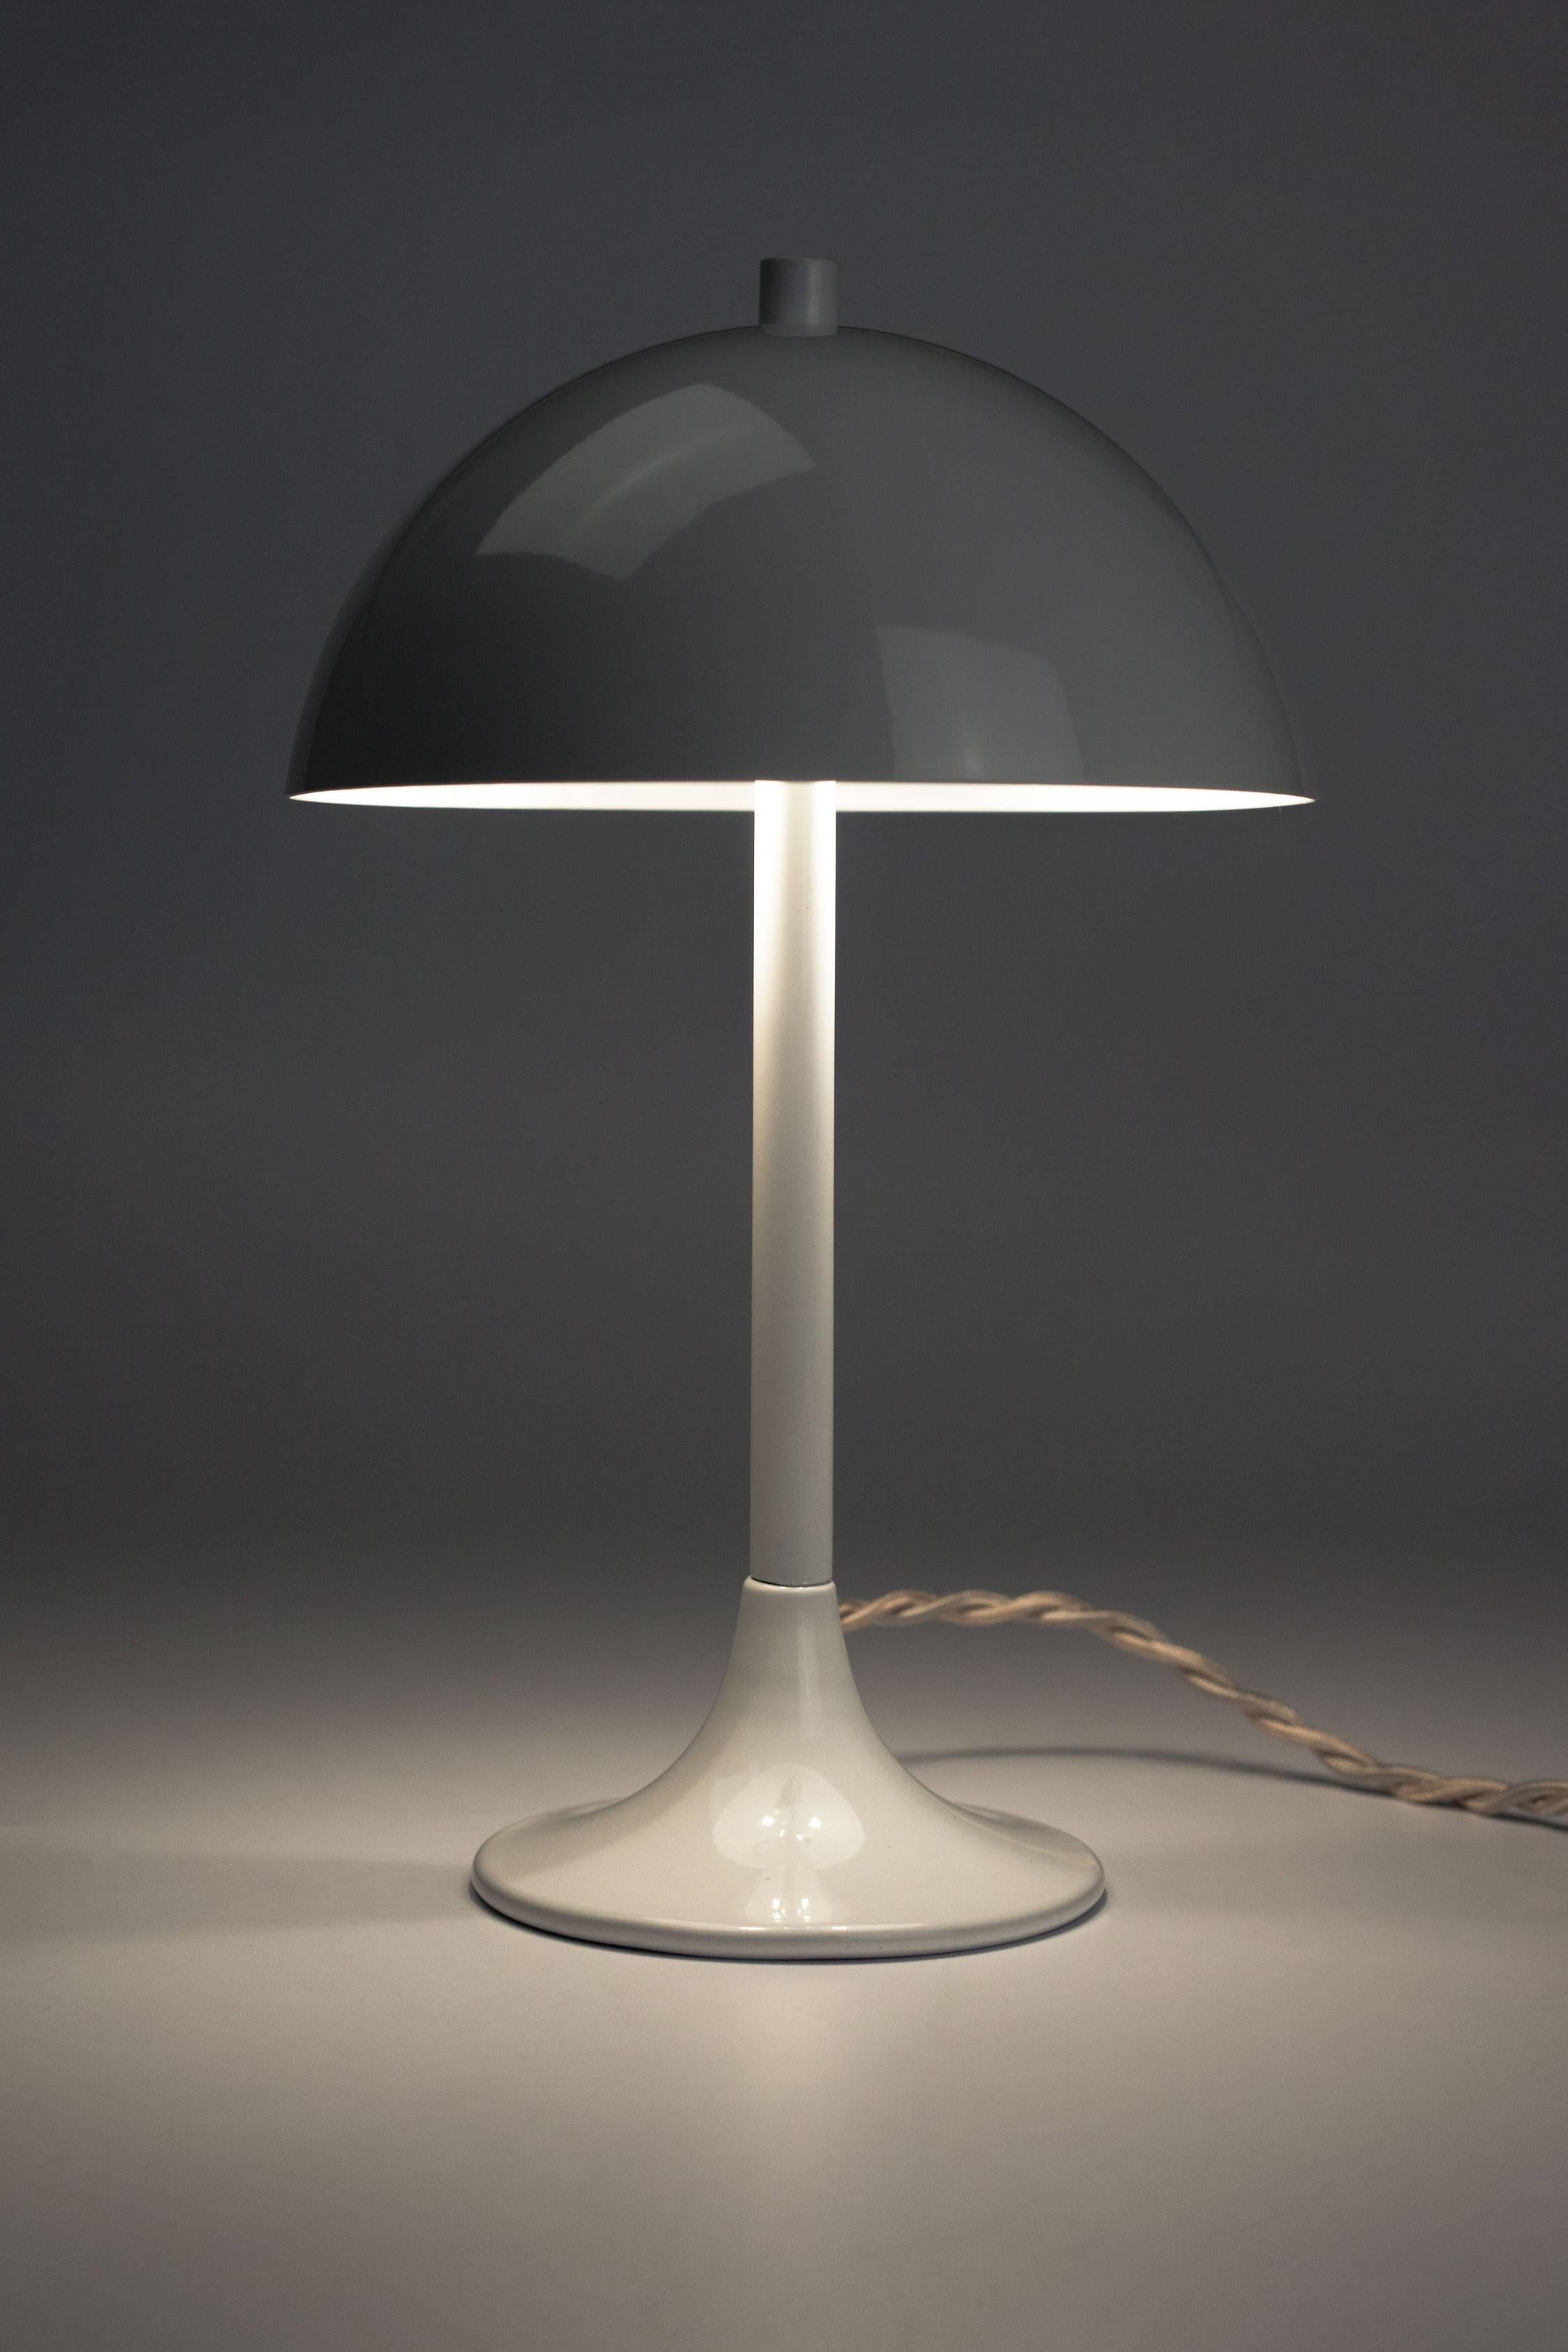 Small white lamp by Editions Pierre Disderot, France, 1950s. Tulip base and mushroom shade in the style of Verner Panton. Dainty and precious, this lamp sits well on a table or shelf. 

Pierre Disderot (born in France, 1920-1991) was a French